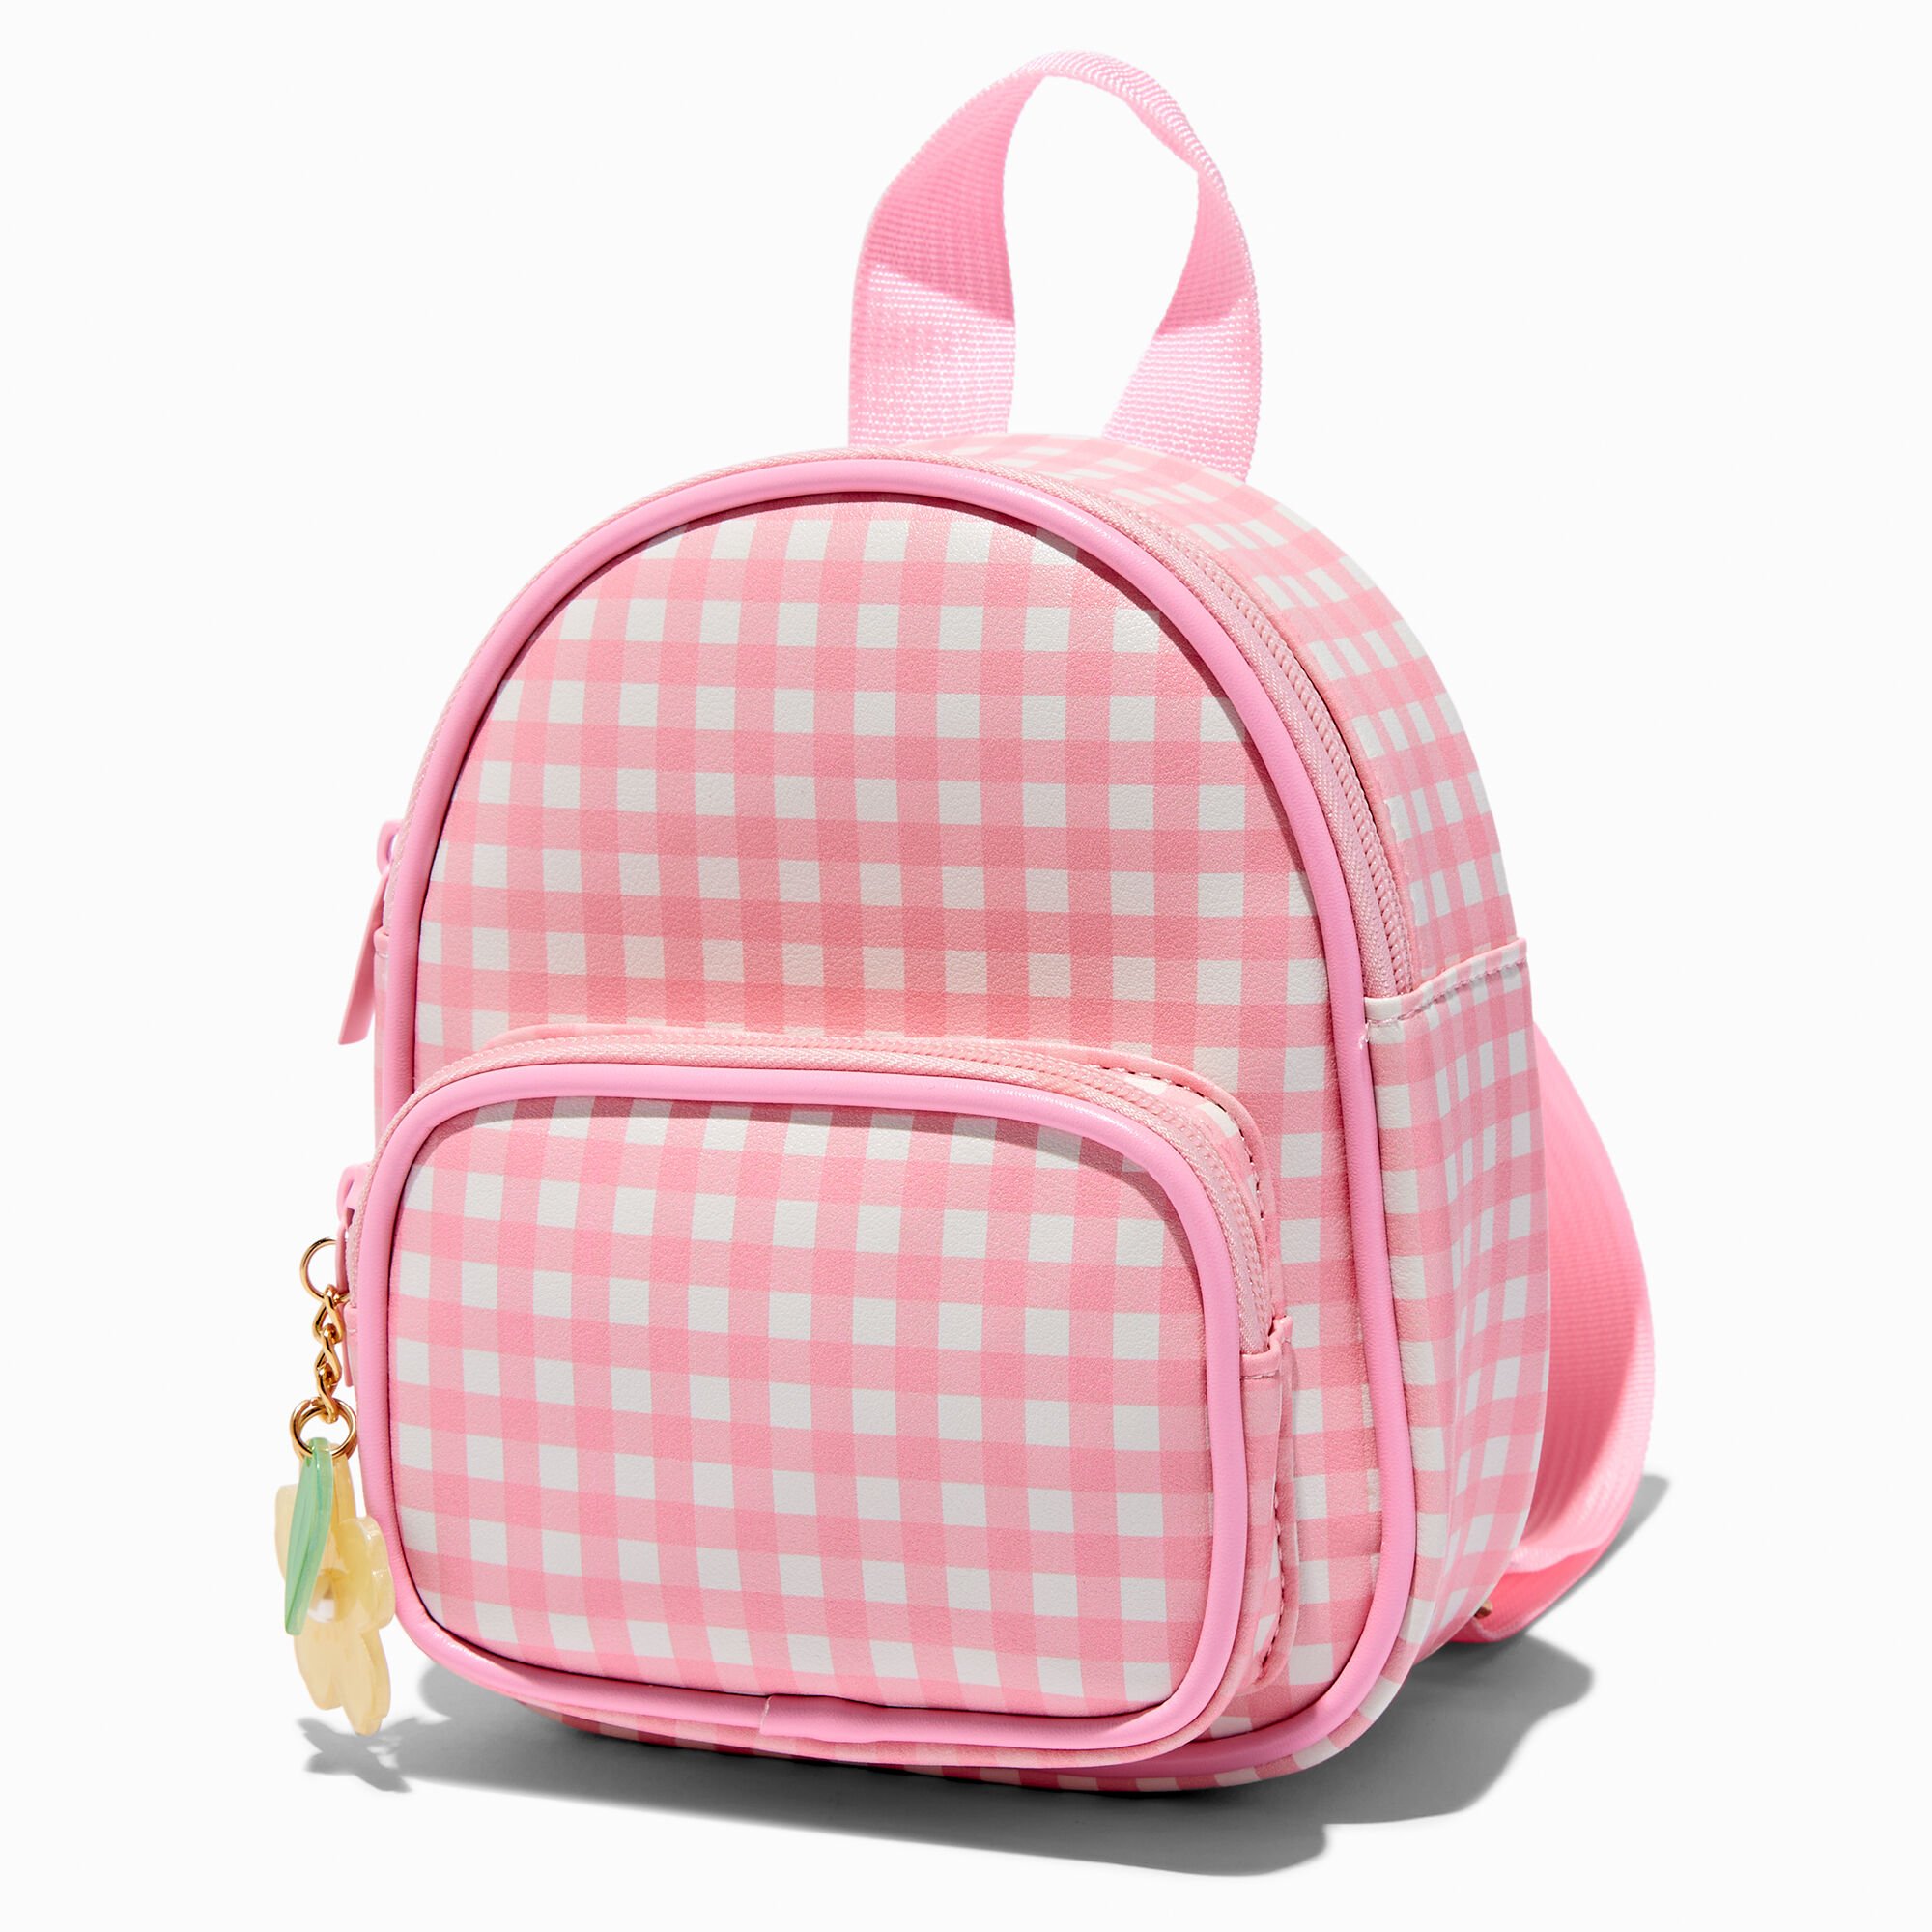 View Claires Club Gingham Tiny Backpack Pink information